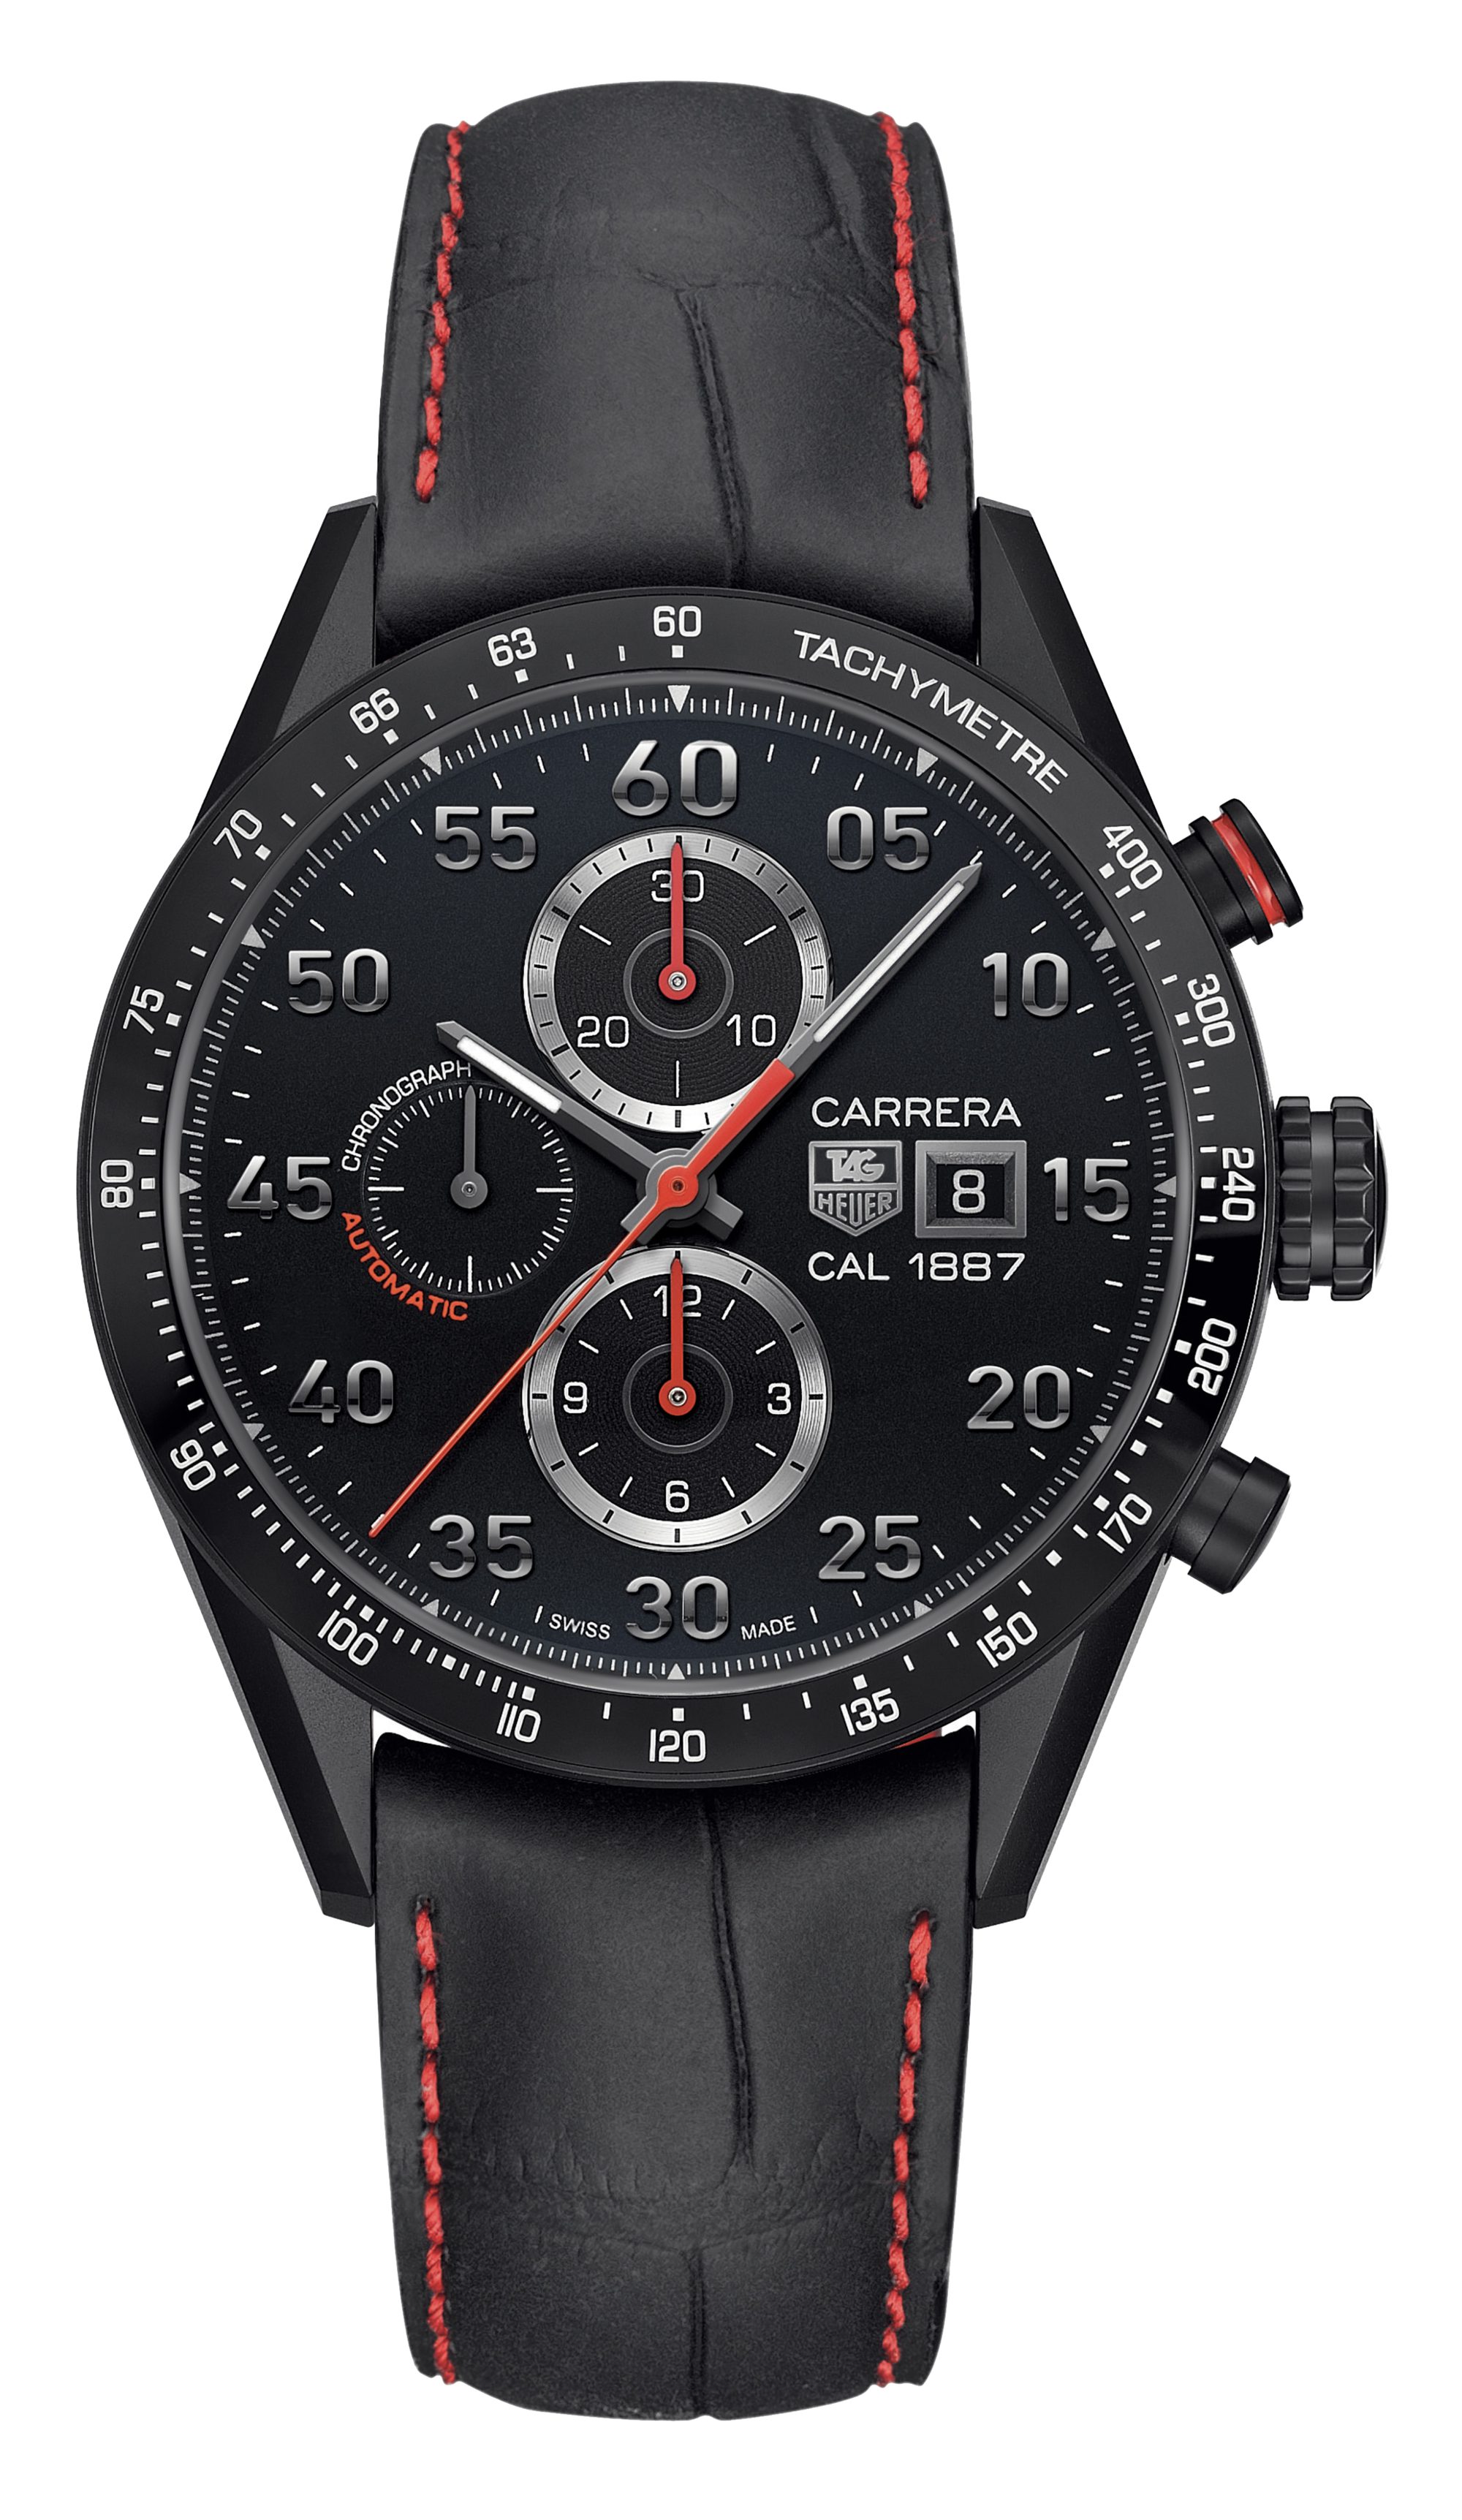 TAG Heuer Watches - The Sportsman's Timepiece